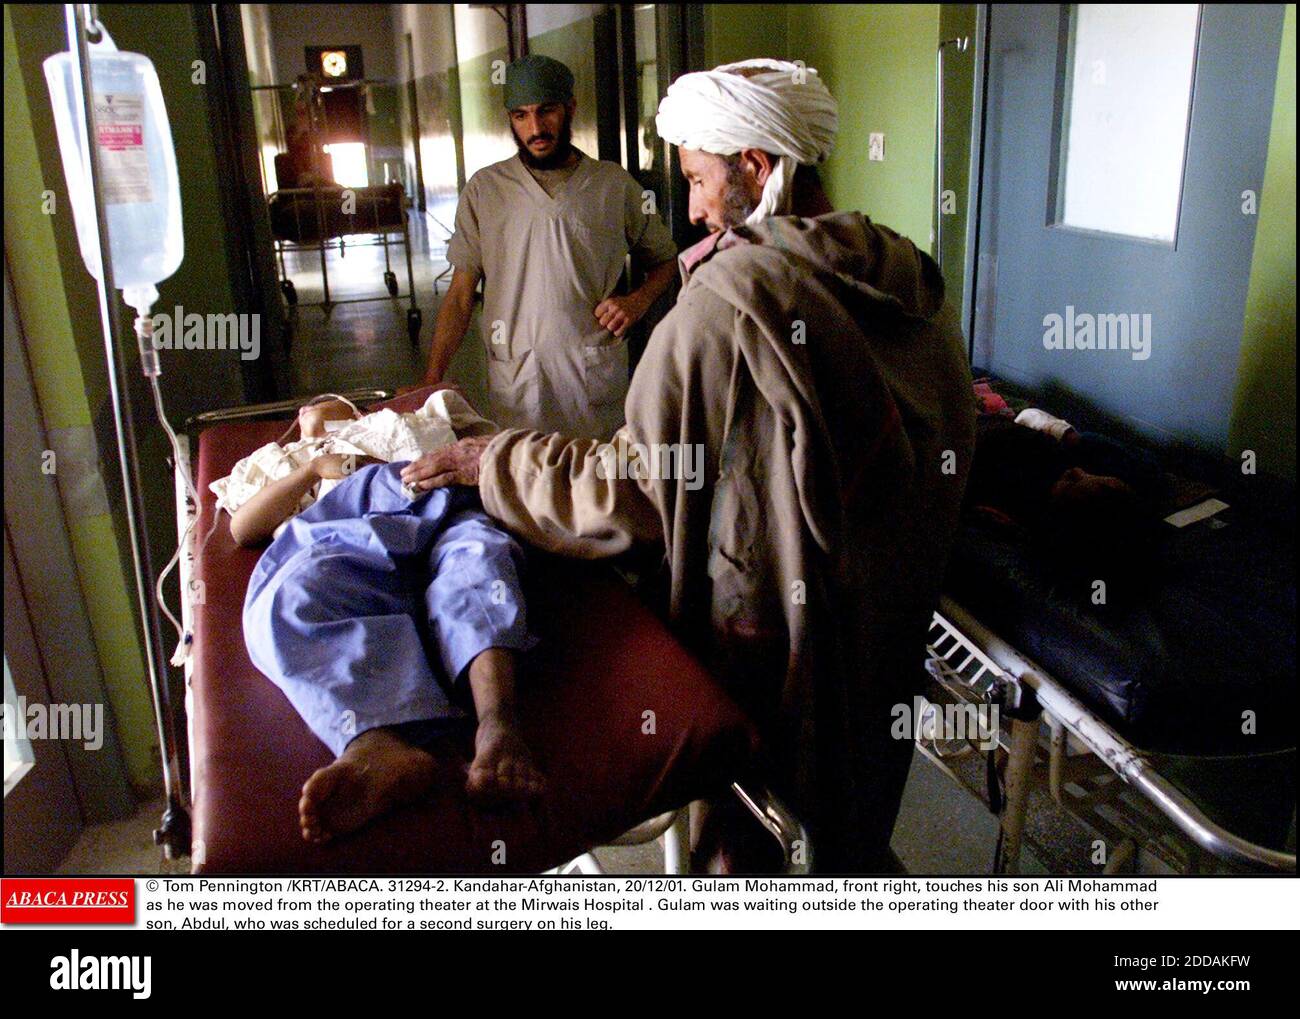 NO FILM, NO VIDEO, NO TV, NO DOCUMENTARY - © Tom Pennington /KRT/ABACA. 31294-2. Kandahar-Afghanistan, 20/12/01. Gulam Mohammad, front right, touches his son Ali Mohammad as he was moved from the operating theater at the Mirwais Hospital . Gulam was waiting outside the operating theater door with Stock Photo